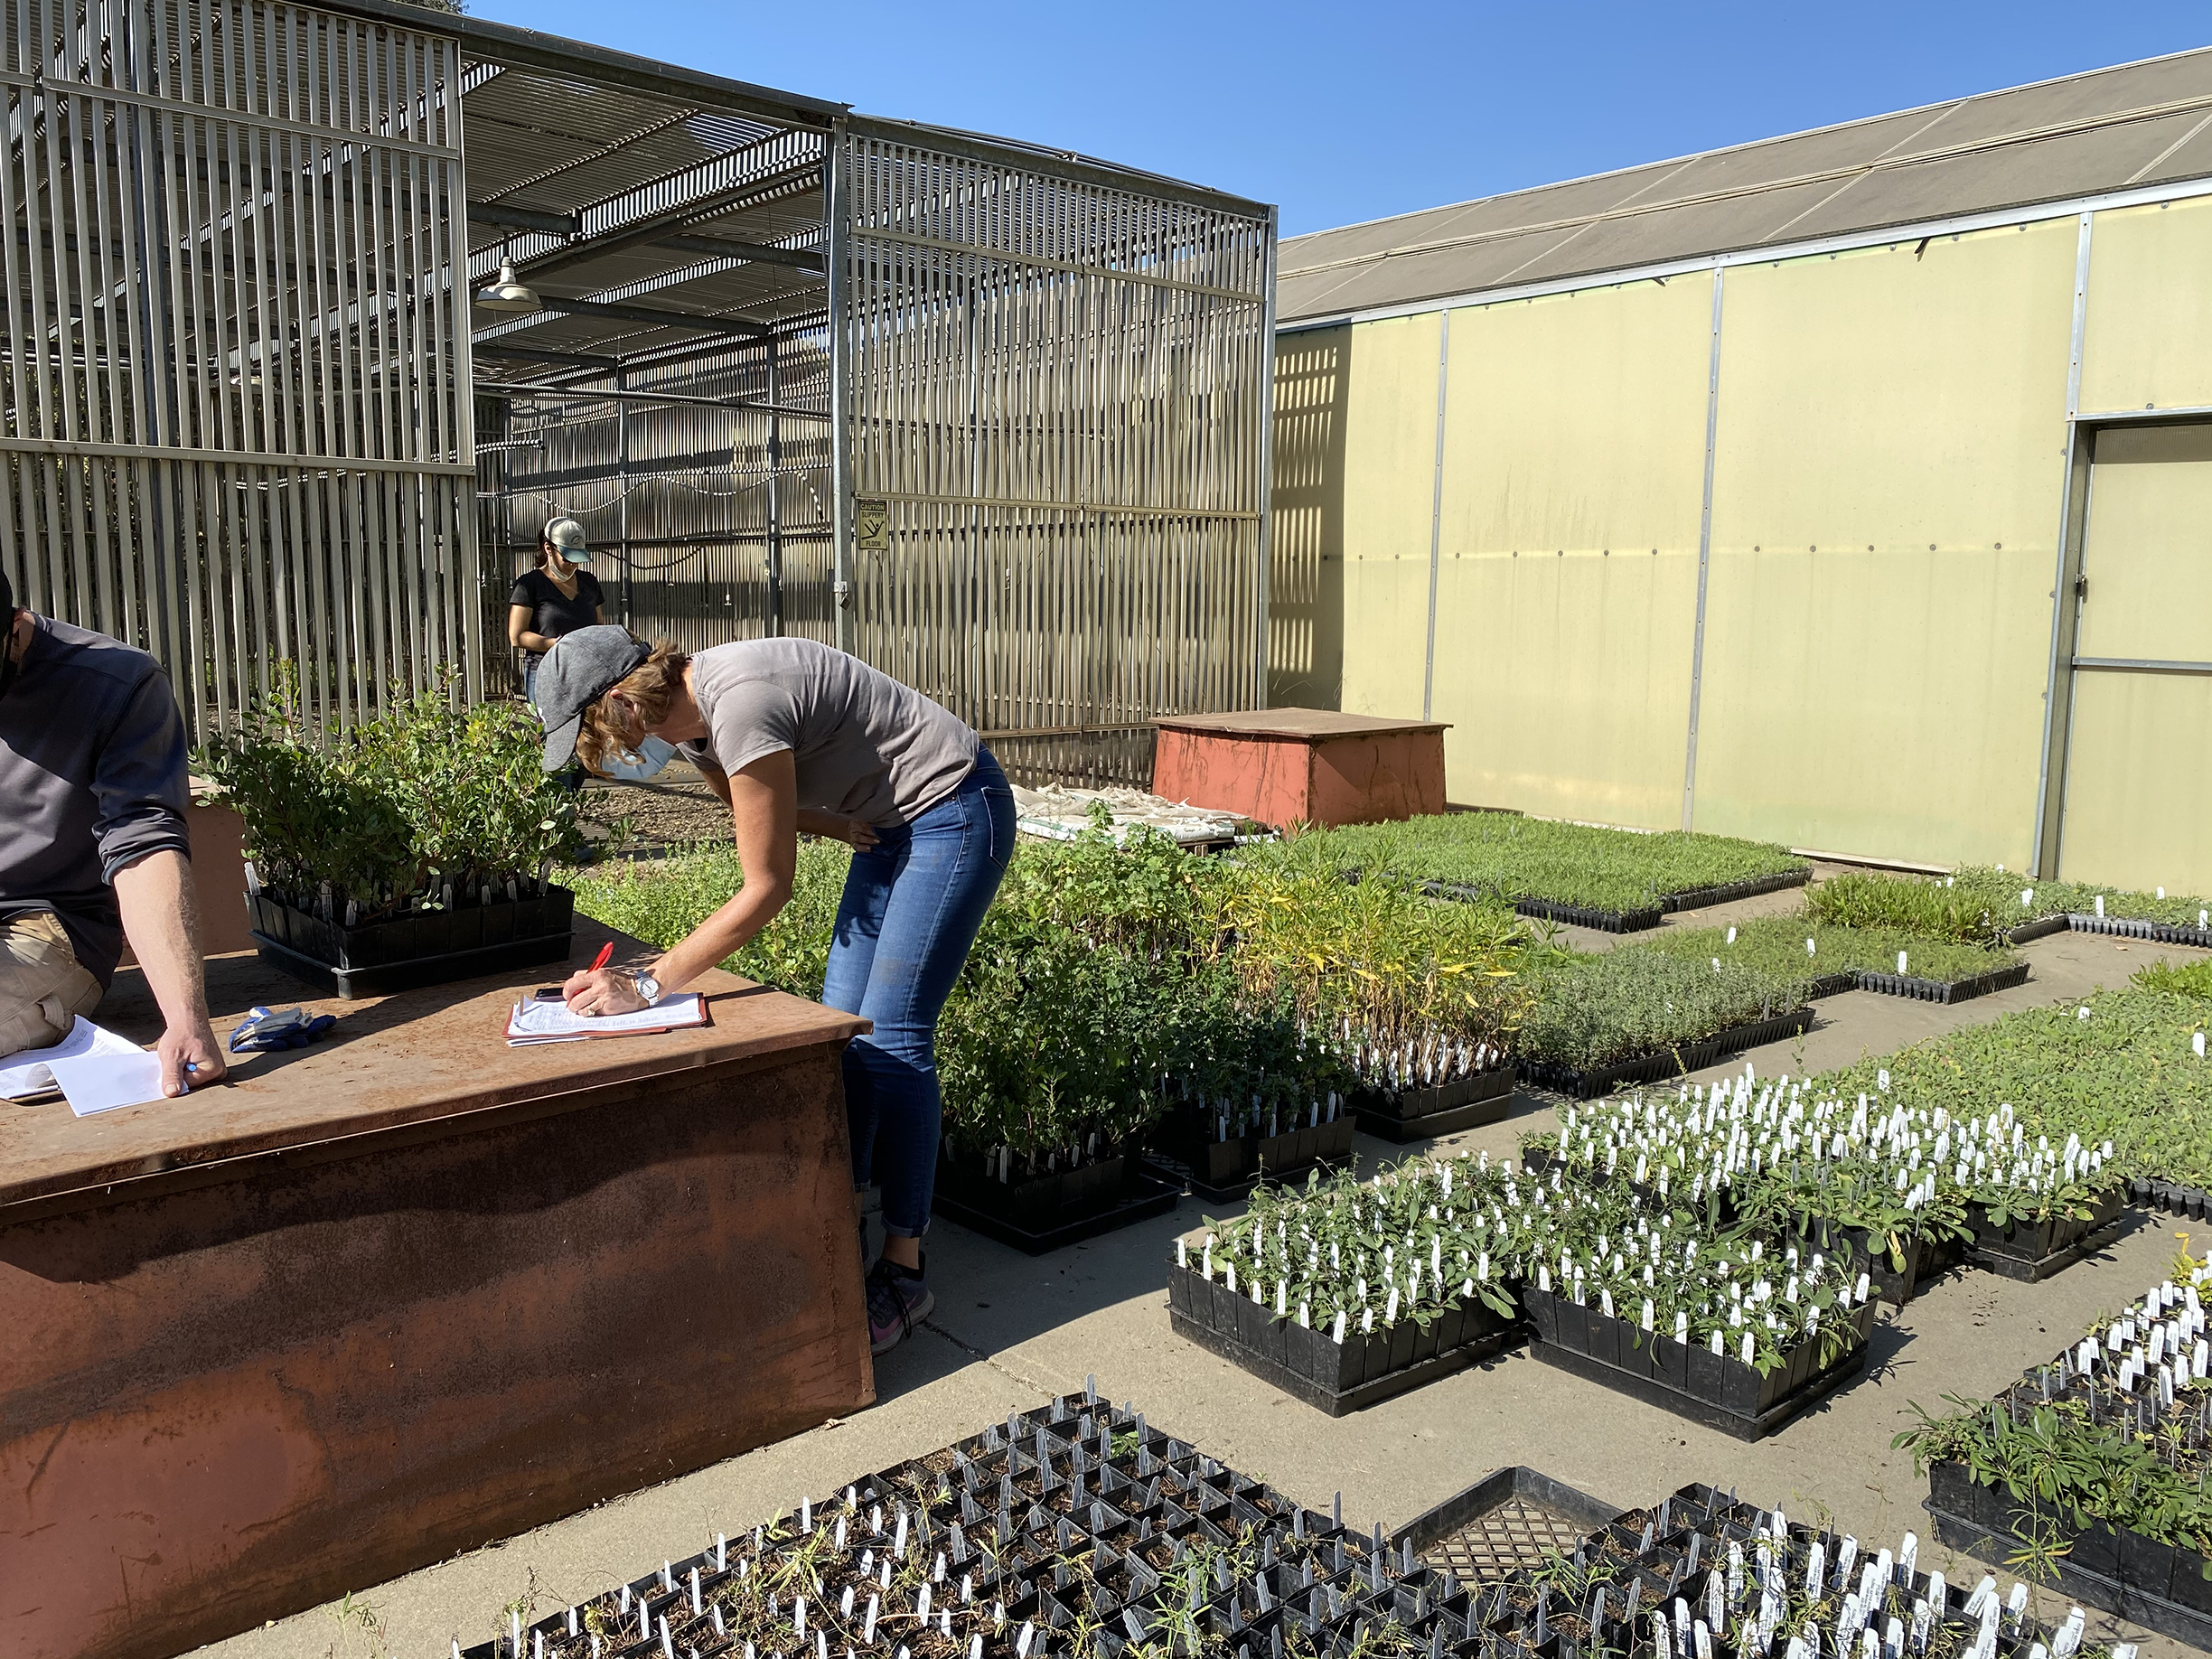 Plant trays containing thousands of seedlings are laid out on the ground.